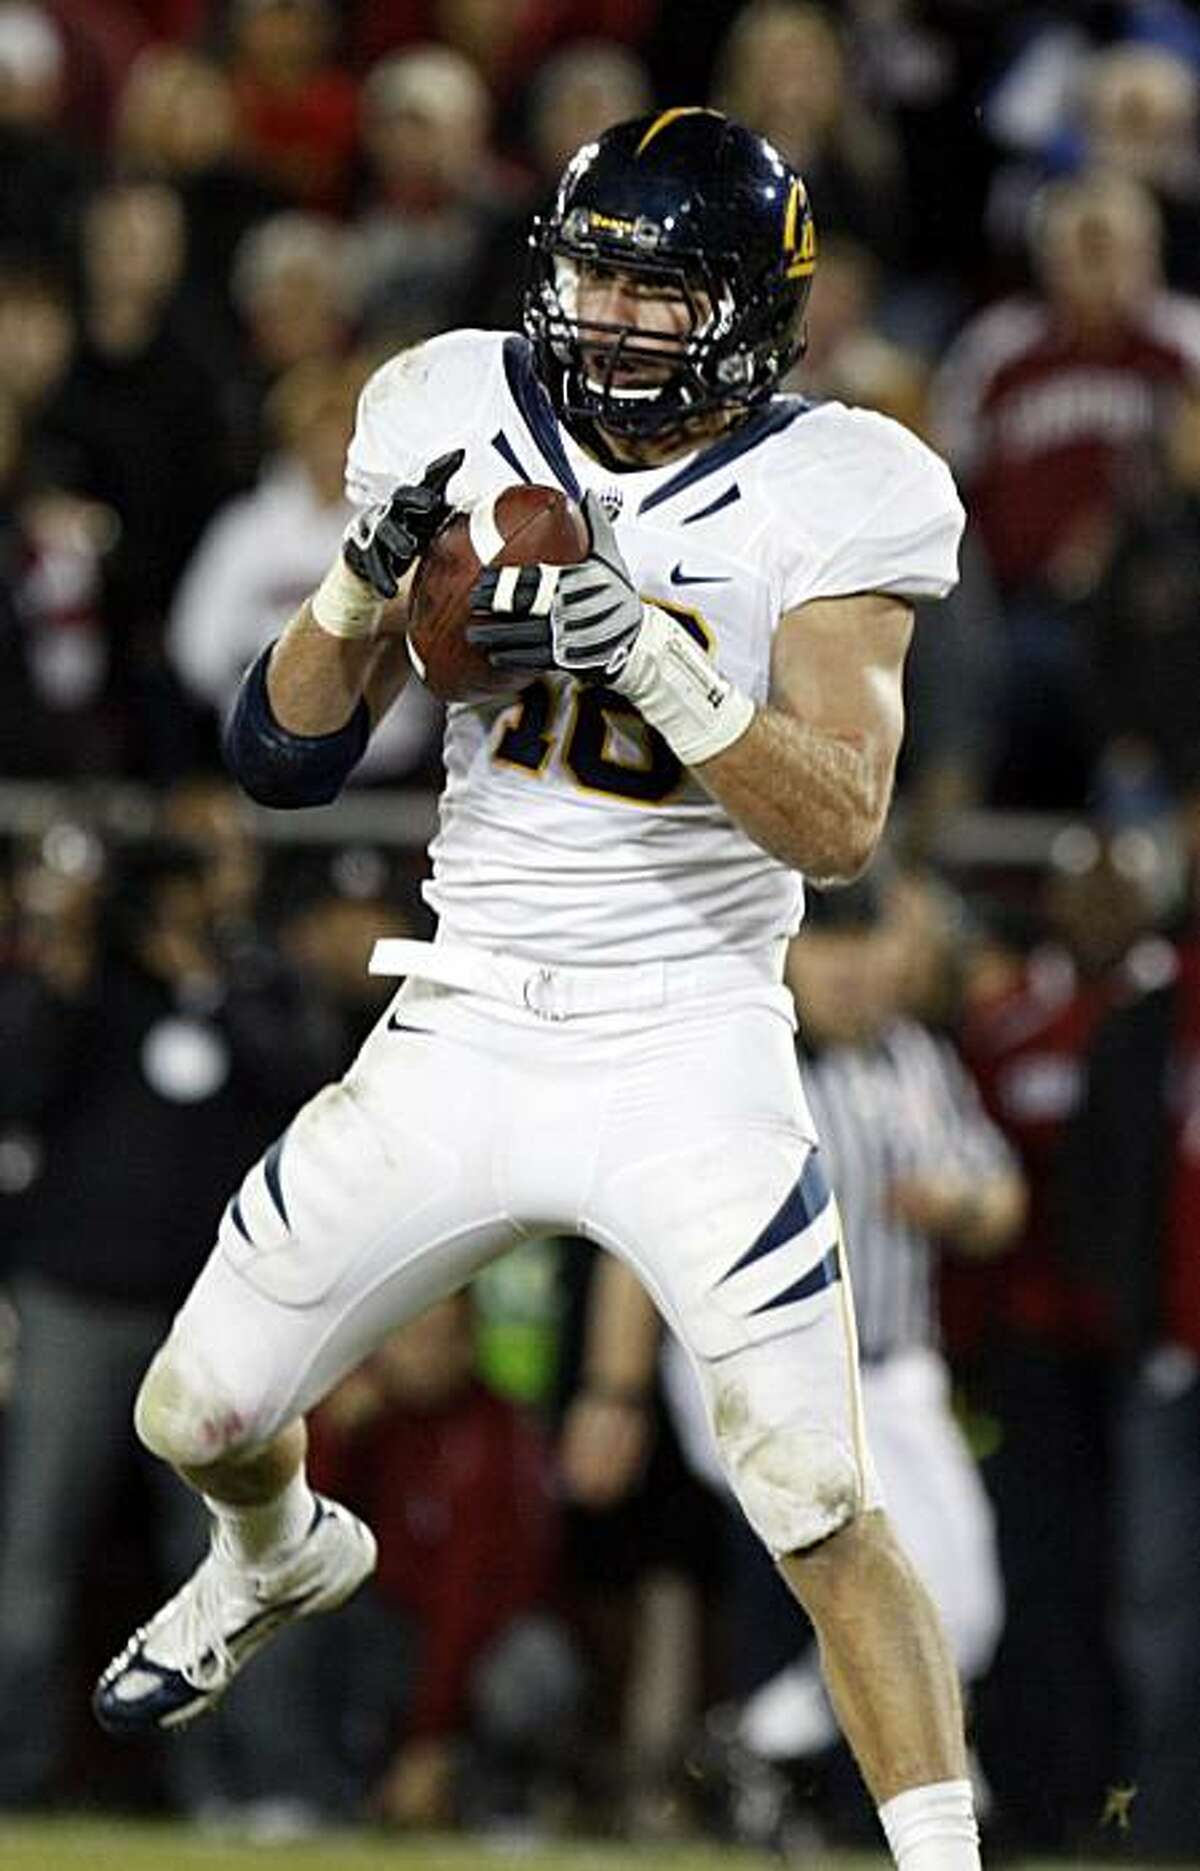 Cal's Mike Mohamed intercepts an Andrew Luck pass in the red zone that sealed the victory for Cal late into the 4th quarter. Cal defeated Stanford in the Big Game 34-28 in 2009.